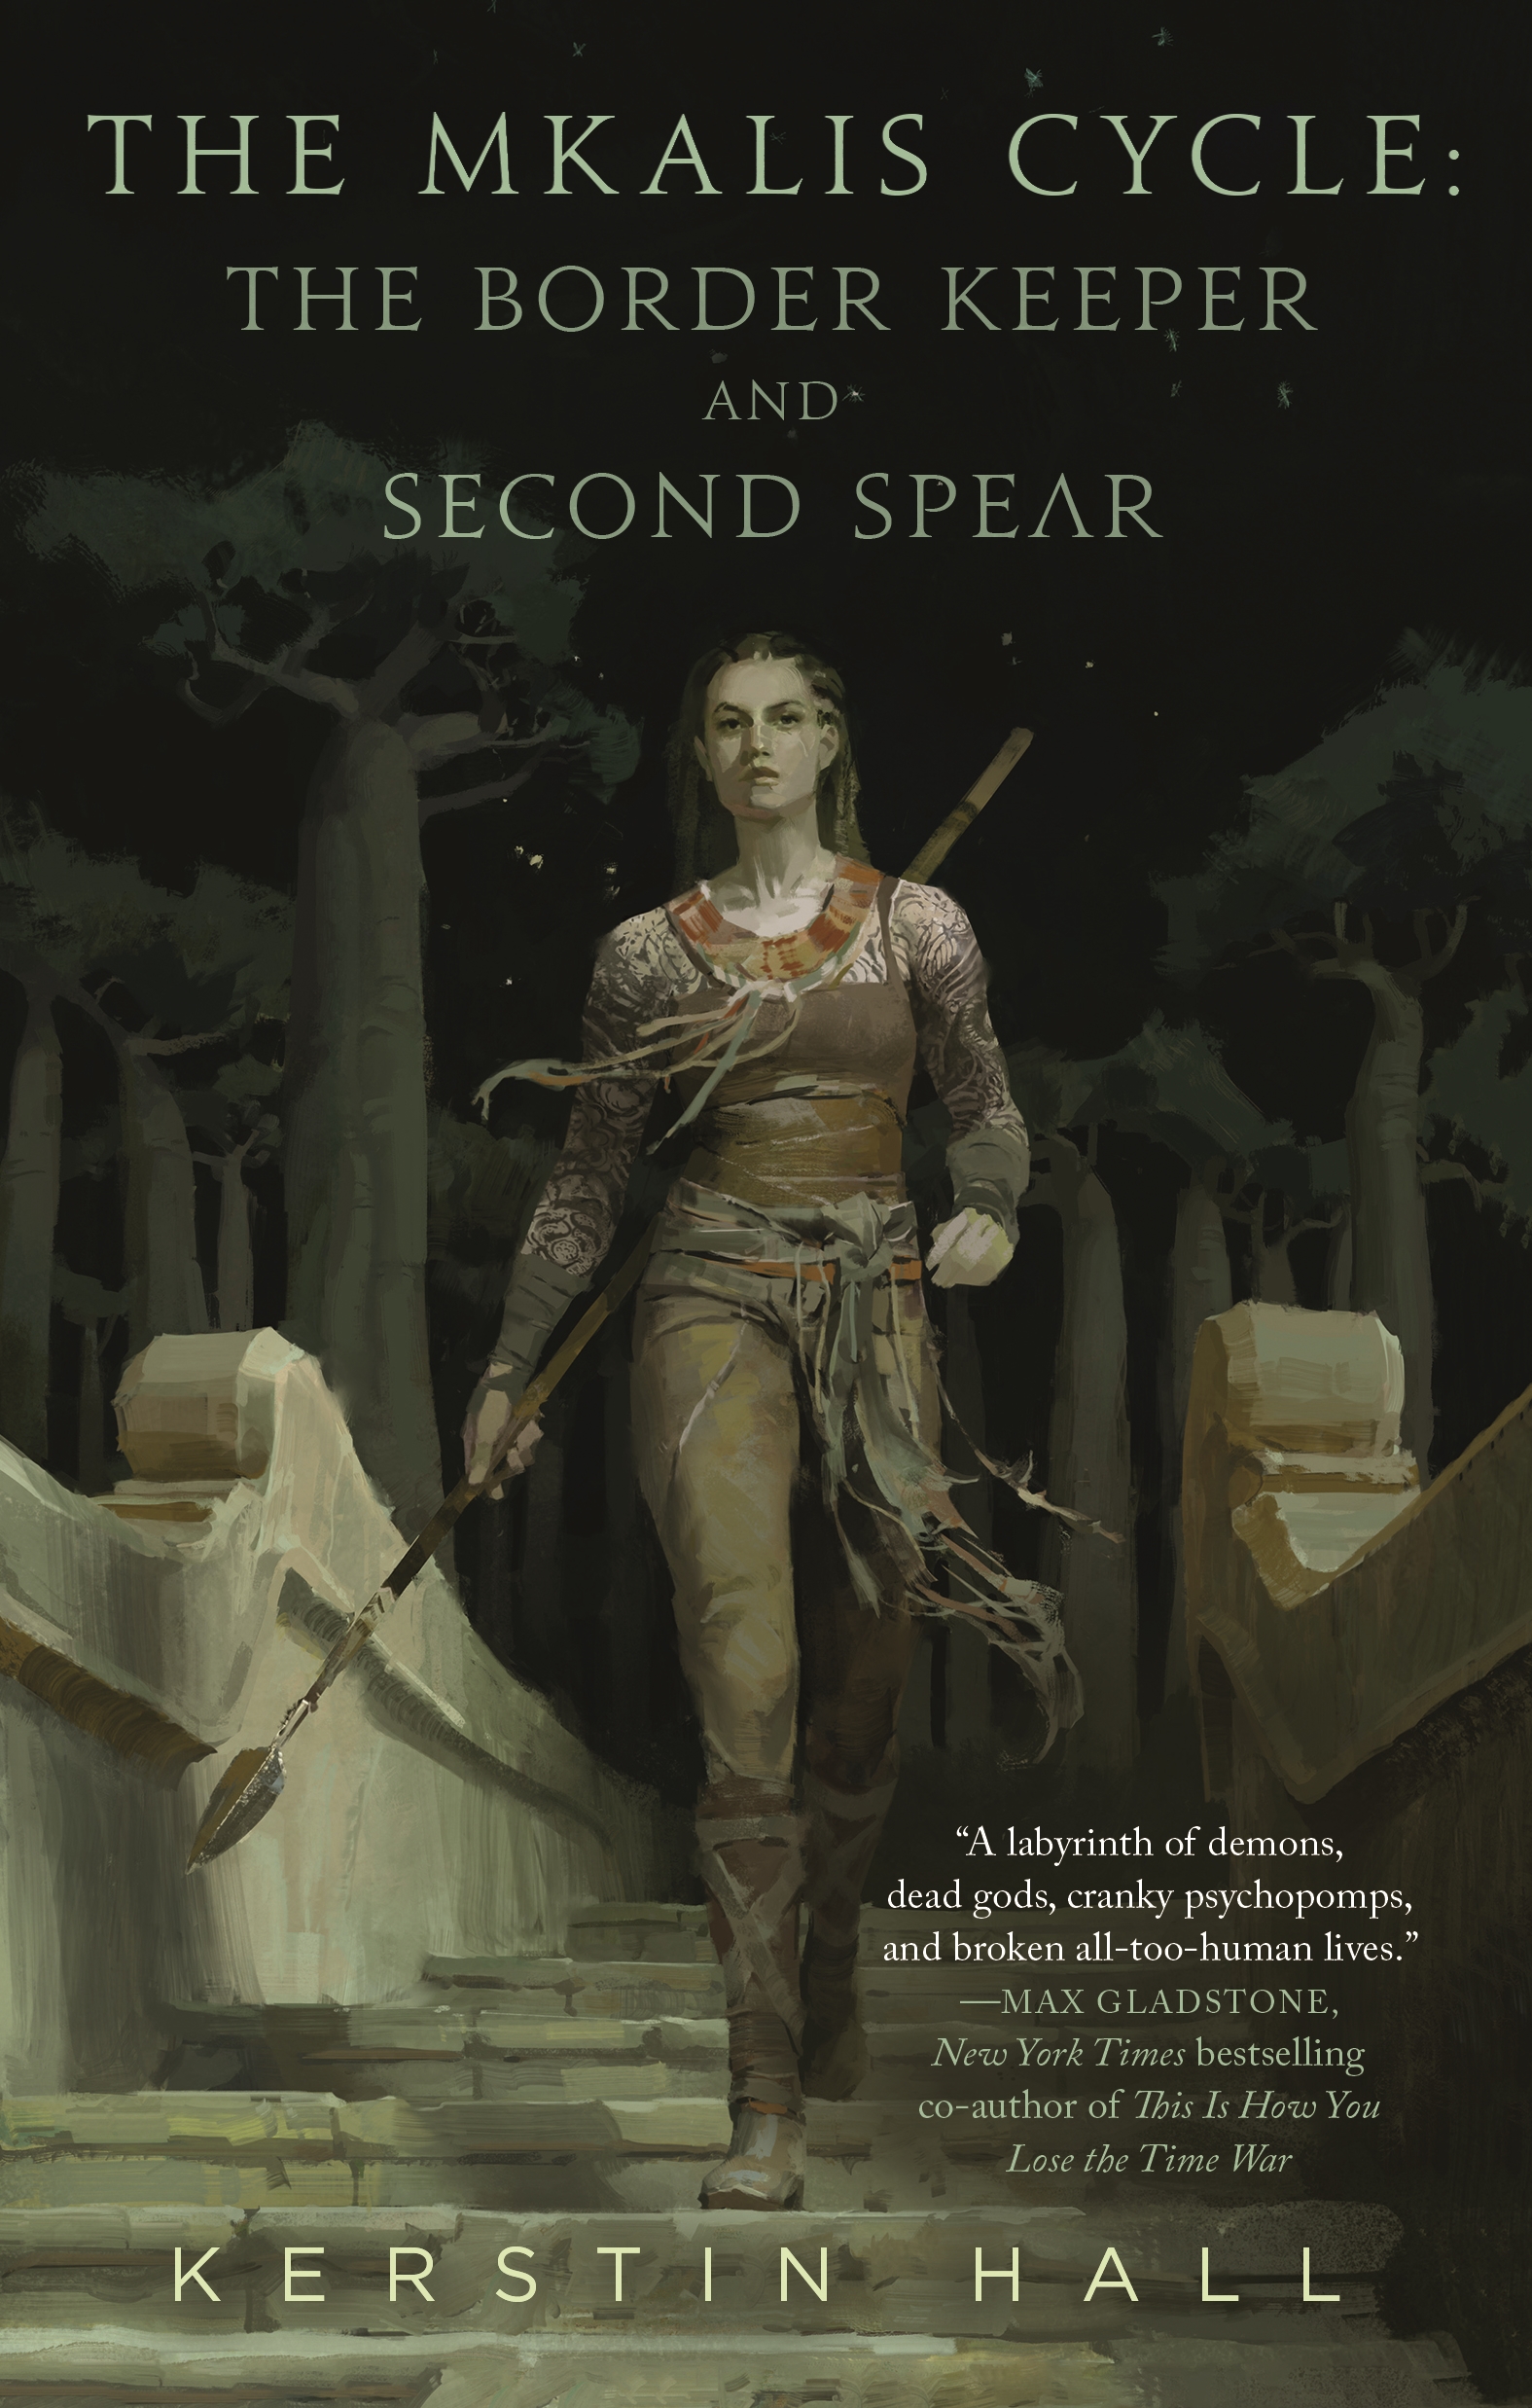 The Mkalis Cycle : The Border Keeper, Second Spear by Kerstin Hall